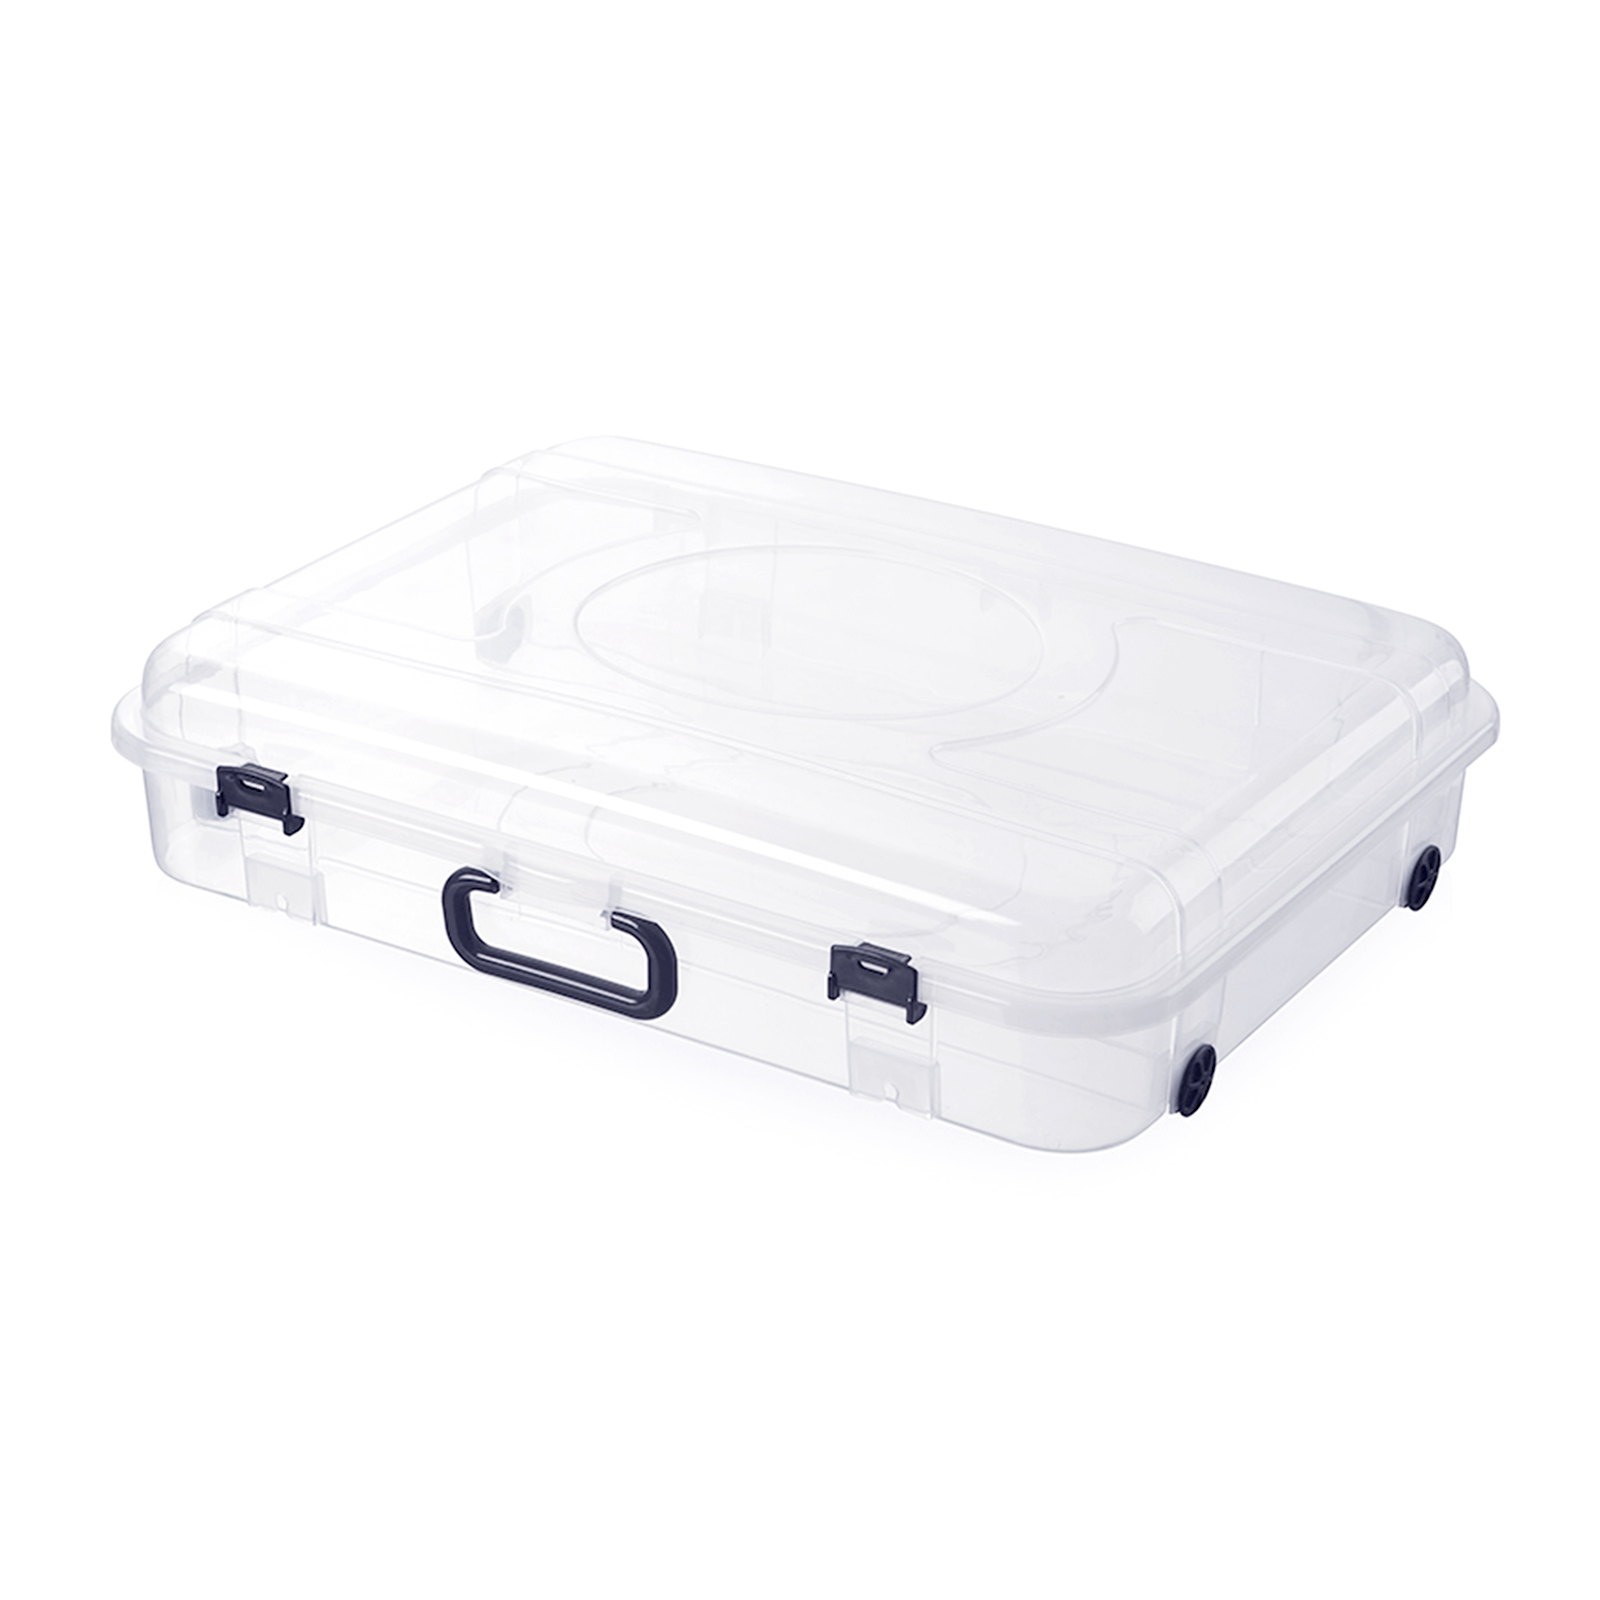 30L Underbed Storage with Wheels and Handle (Clear)